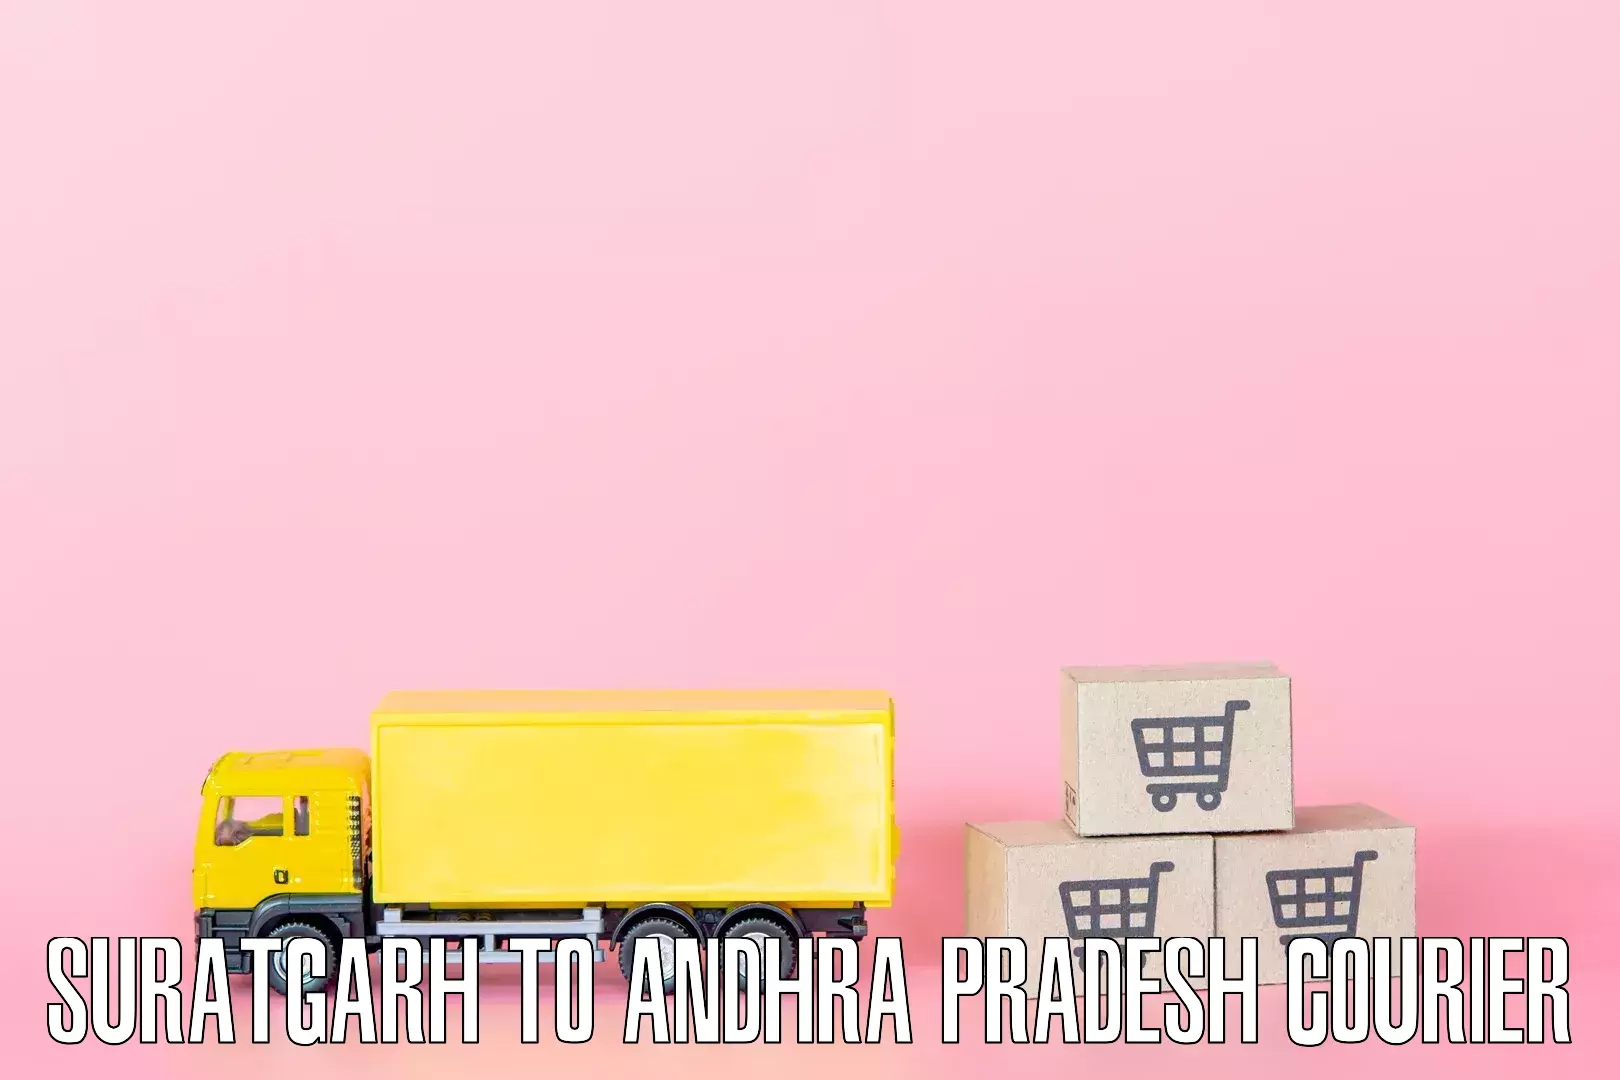 Professional movers and packers Suratgarh to Andhra Pradesh